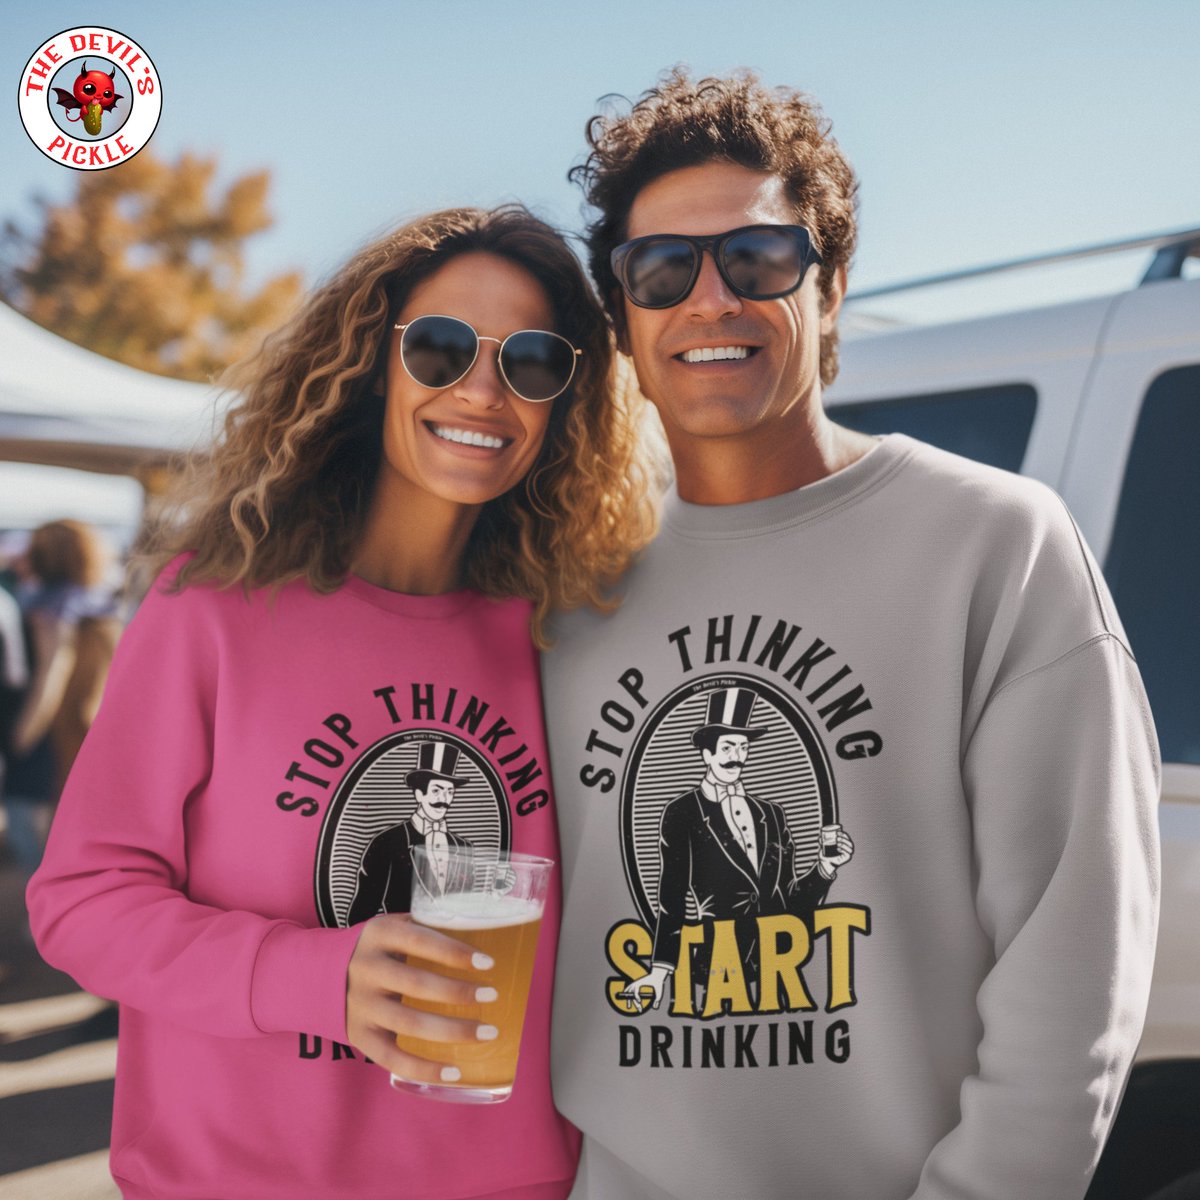 No need for deep thoughts when you've got a cold drink and a comfy crewneck on hand ✨ The Best Beer & Booze Drinking Sweatshirts Around!

#StopThinkingStartDrinking #byob  #beerdrinking #beertshirts #drinkup #SipSipHooray #daydrinking  #ThirstyThursday #beeroclock #beerandbooze